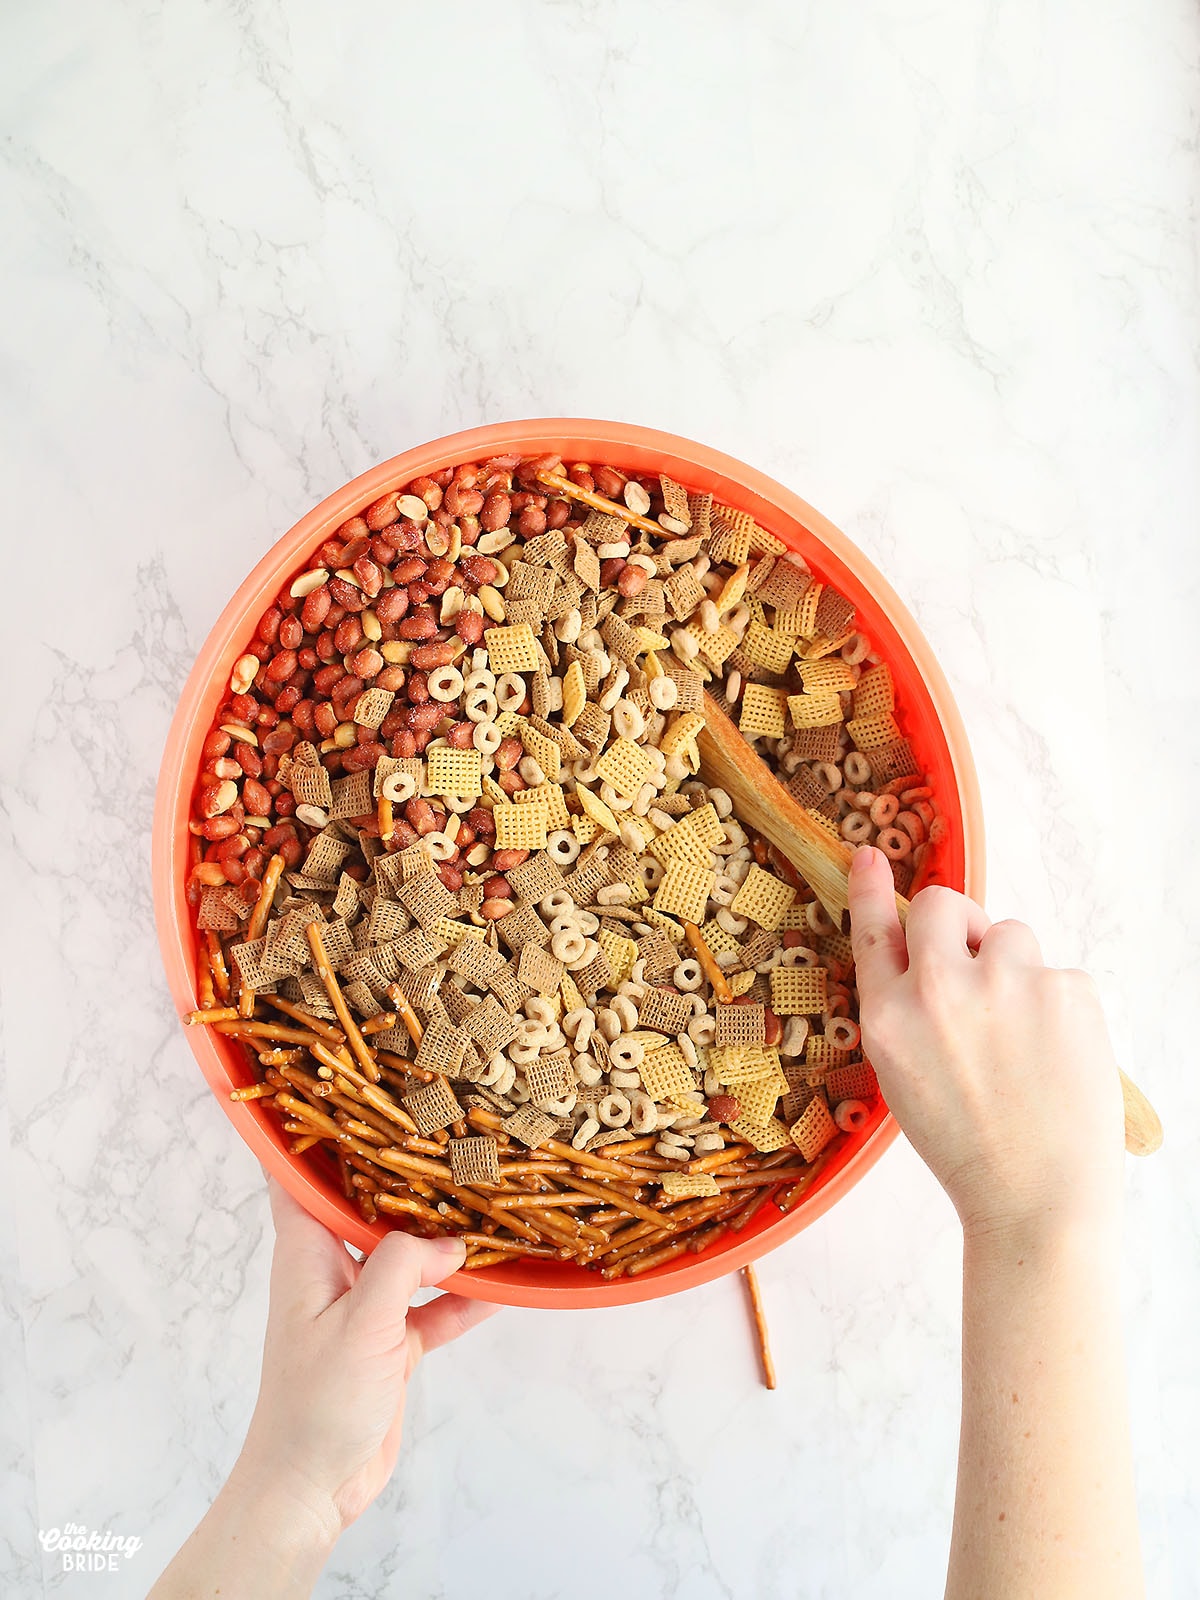 hand stirring chex mix ingredients in a large orange plastic bowl